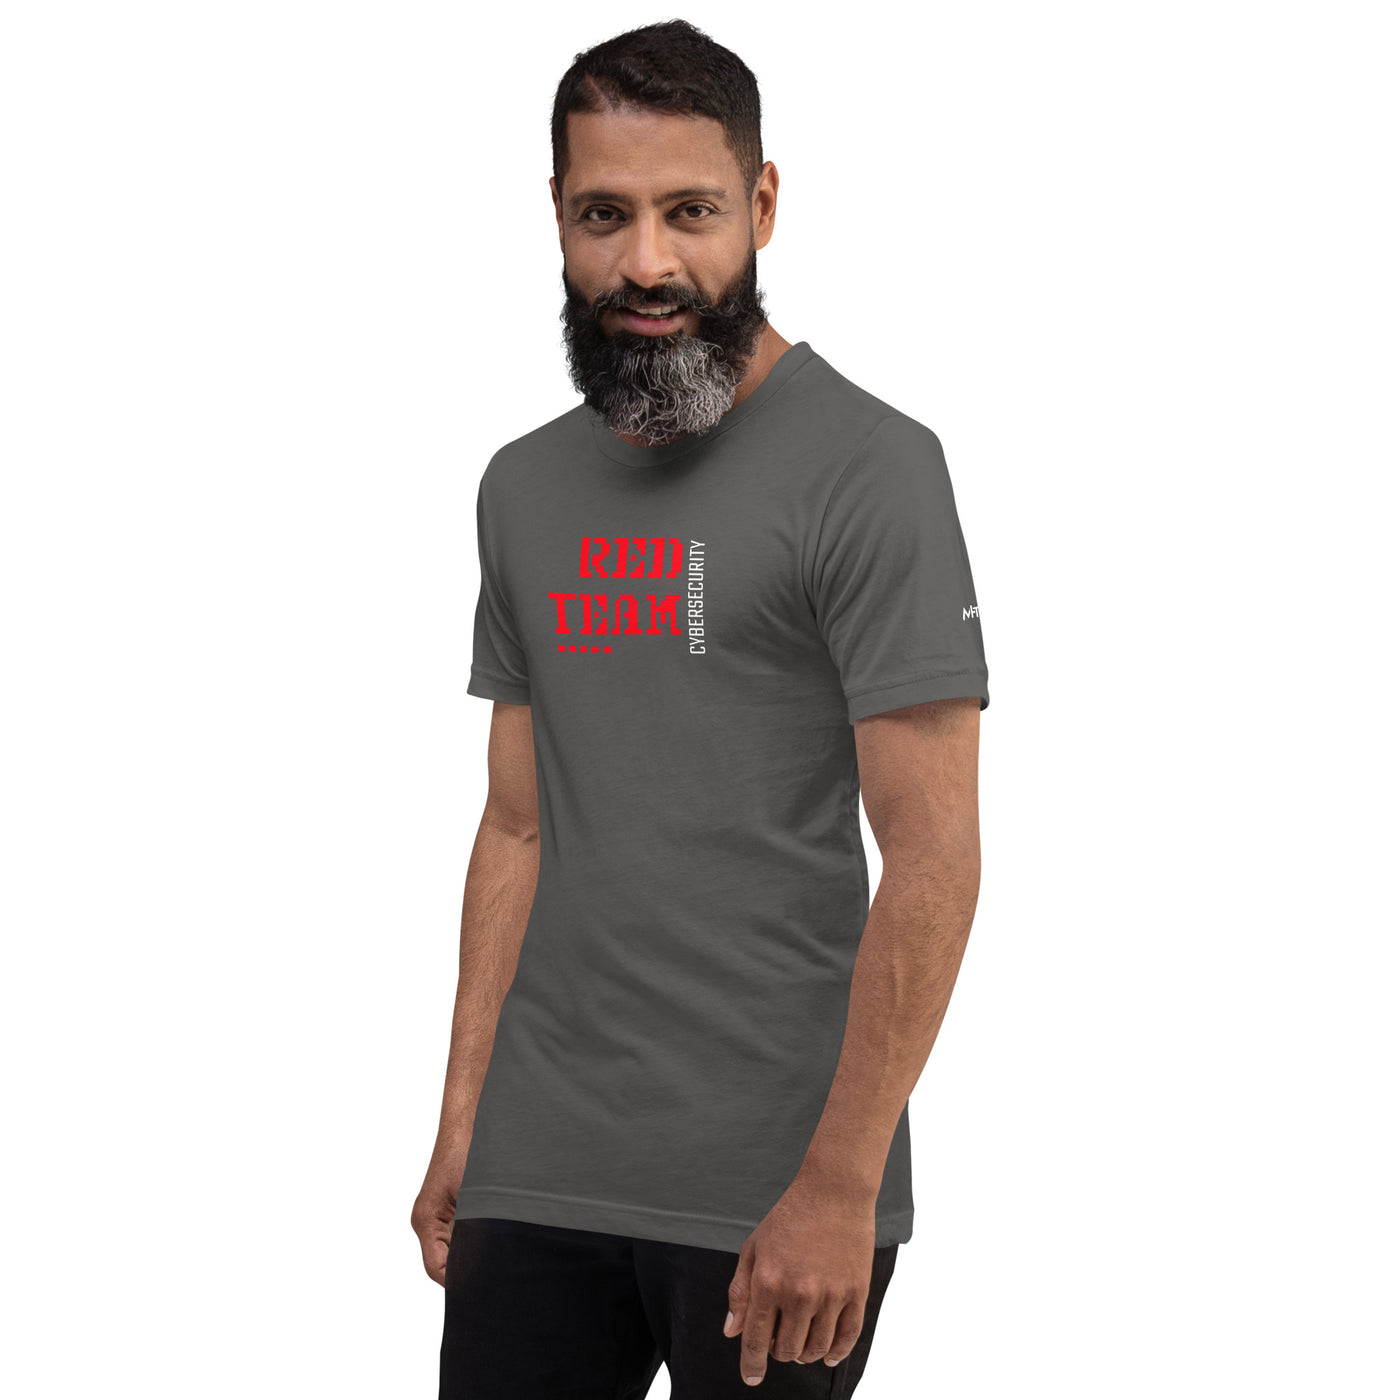 Cyber Security Red Team V15 - Unisex t-shirt